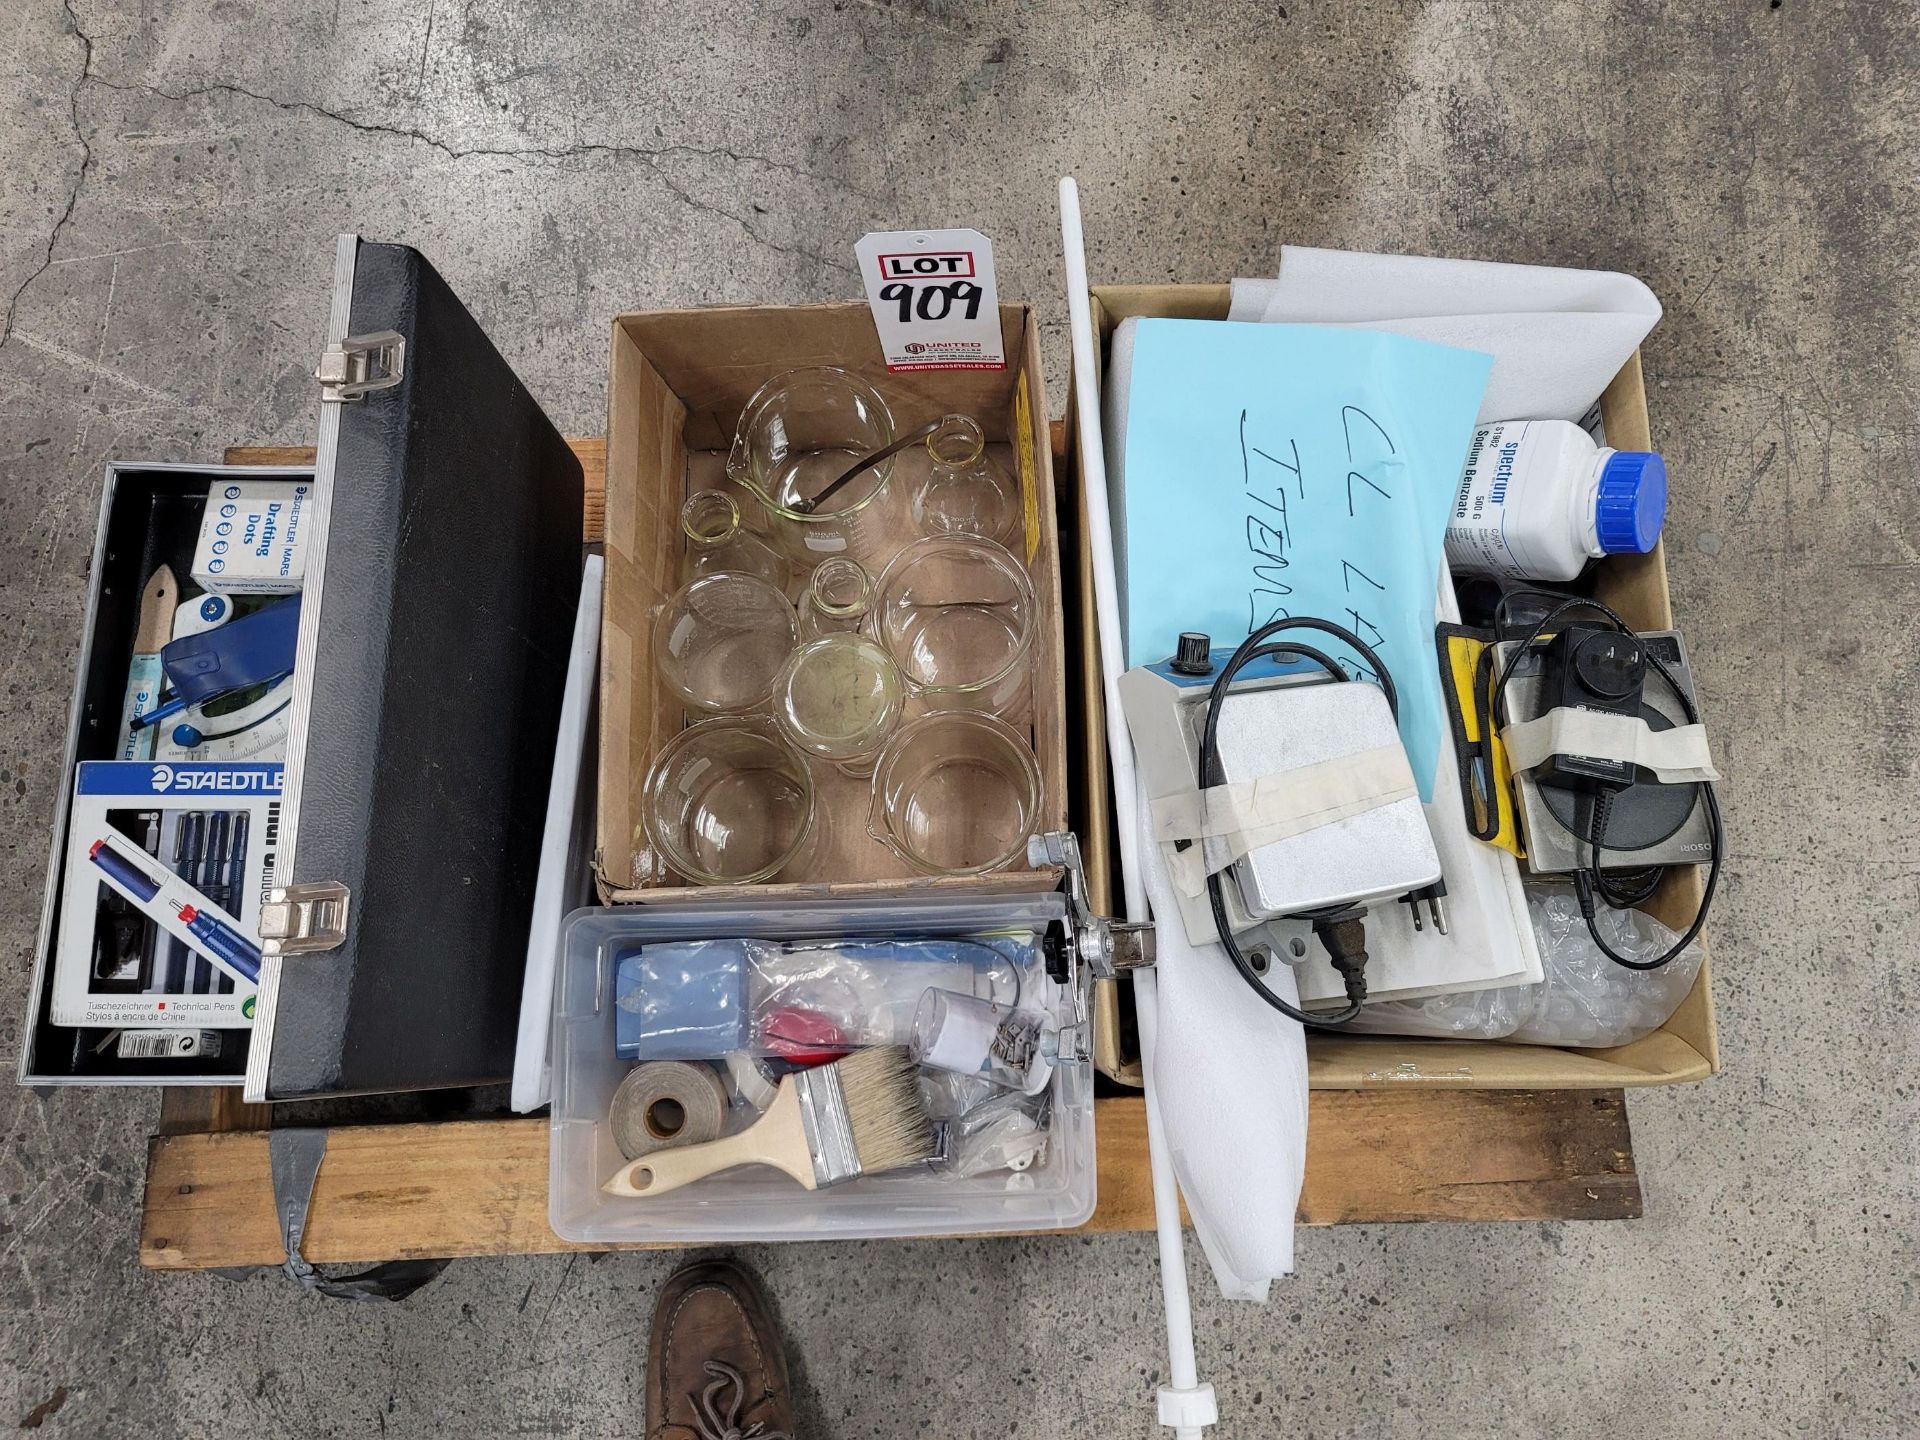 LOT - SMALL PALLET OF MISC. LABWARE ITEMS: GLASSWARE, DRAFTING SUPPLIES, ETC.